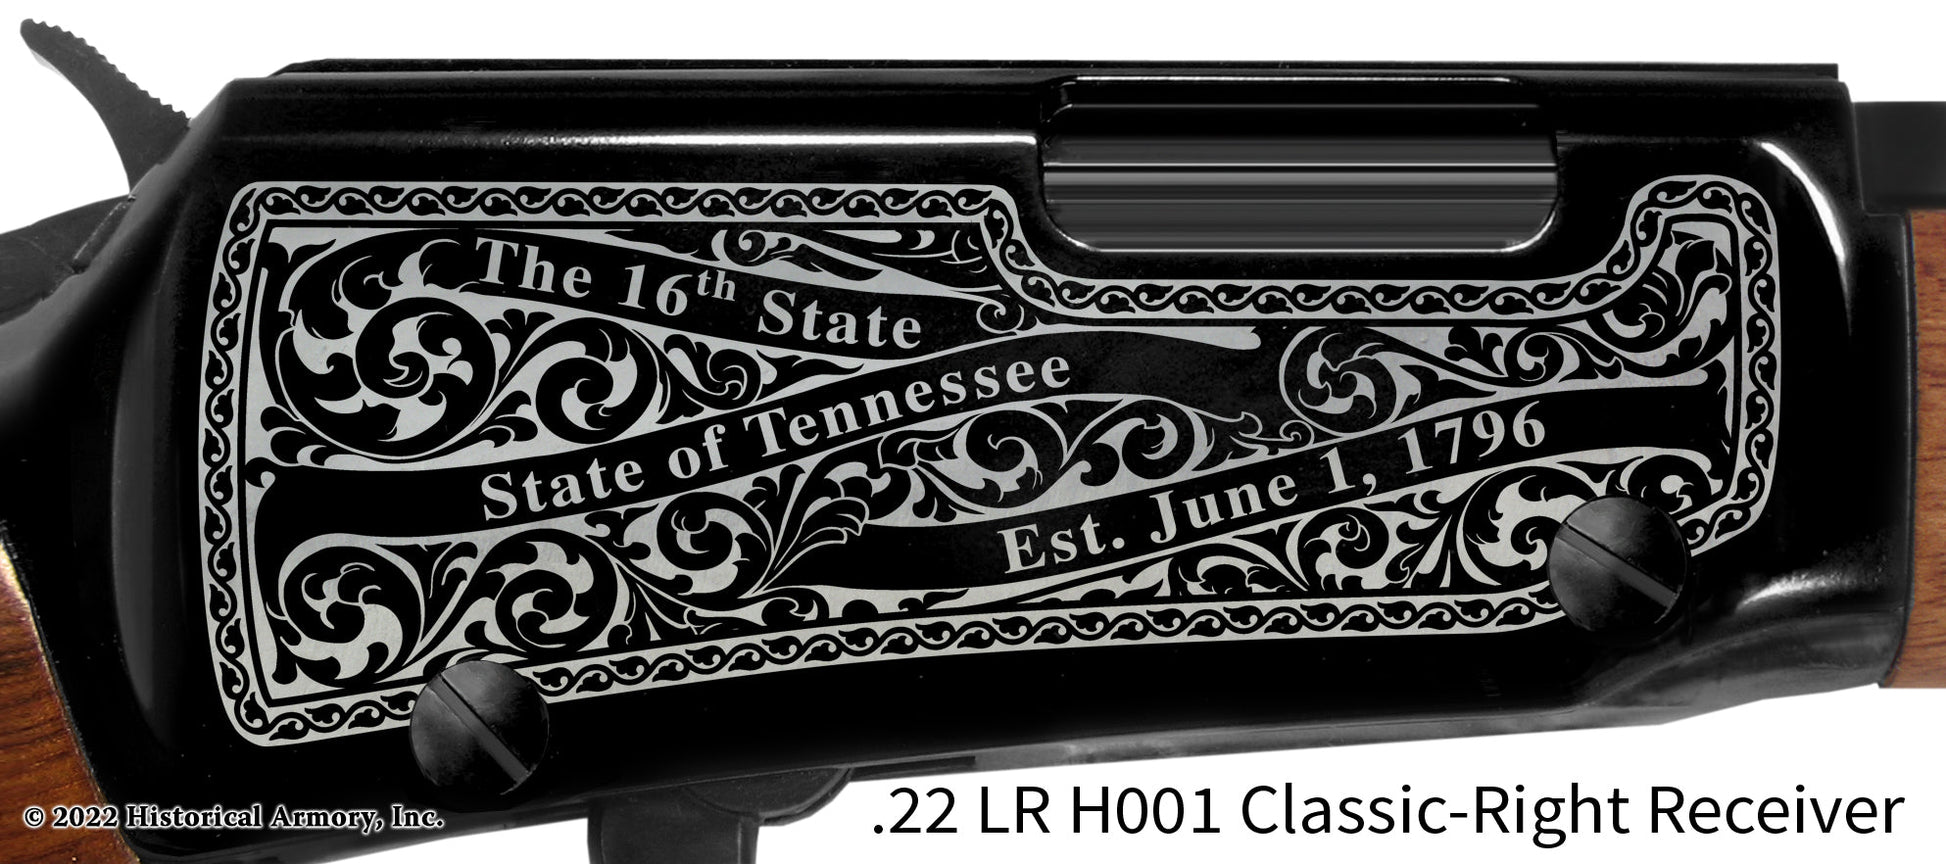 Fentress County Tennessee Engraved Henry H001 Rifle